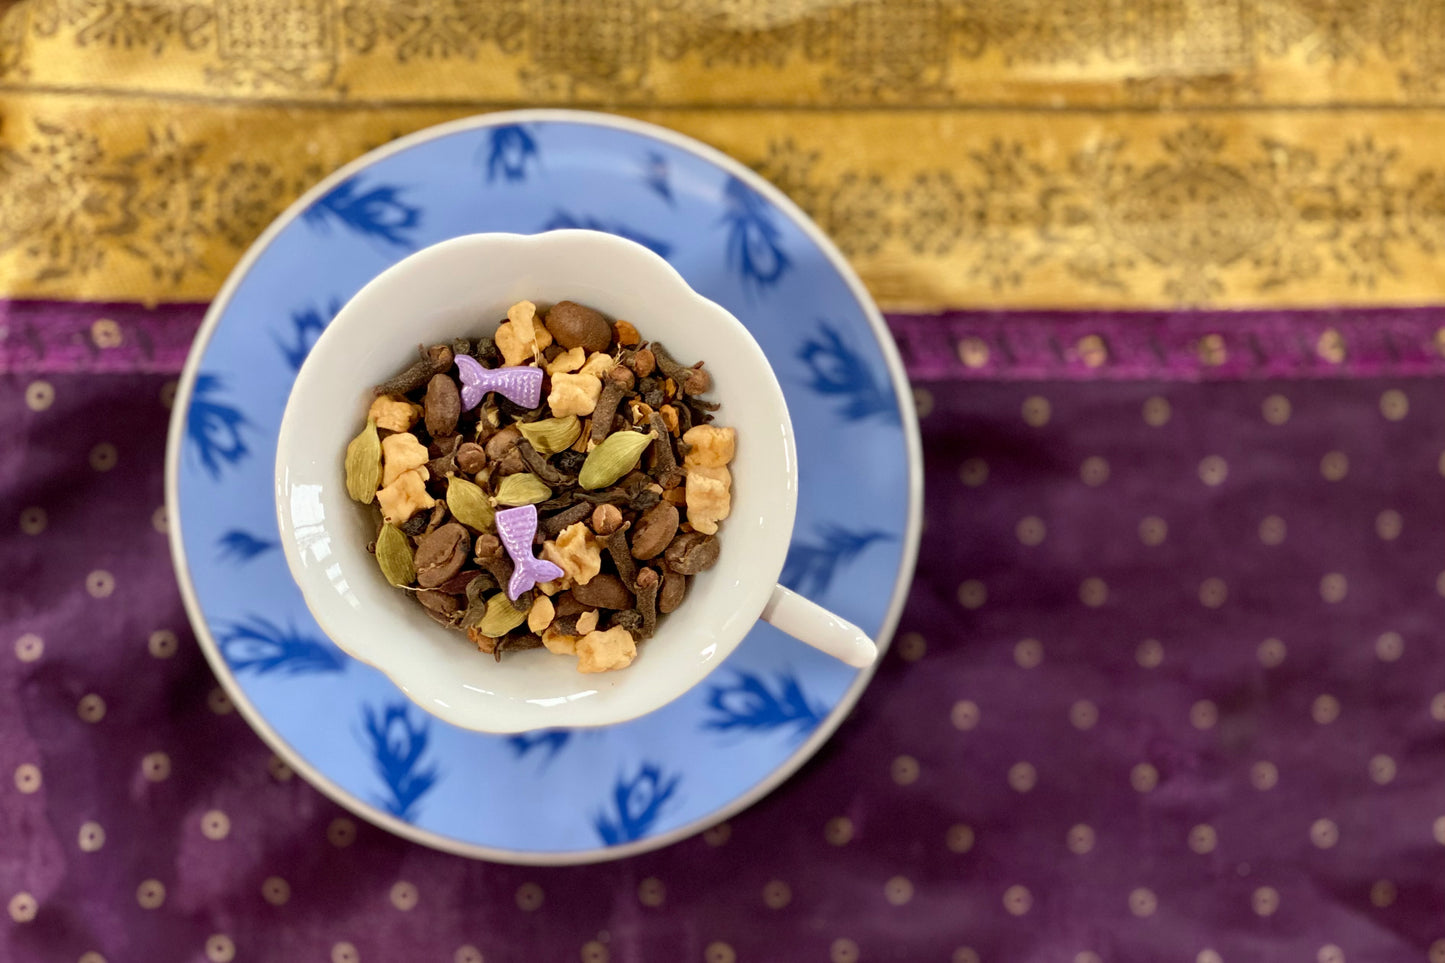 teacup full of spices, coffee beans and purple mermaid tail sprinkles